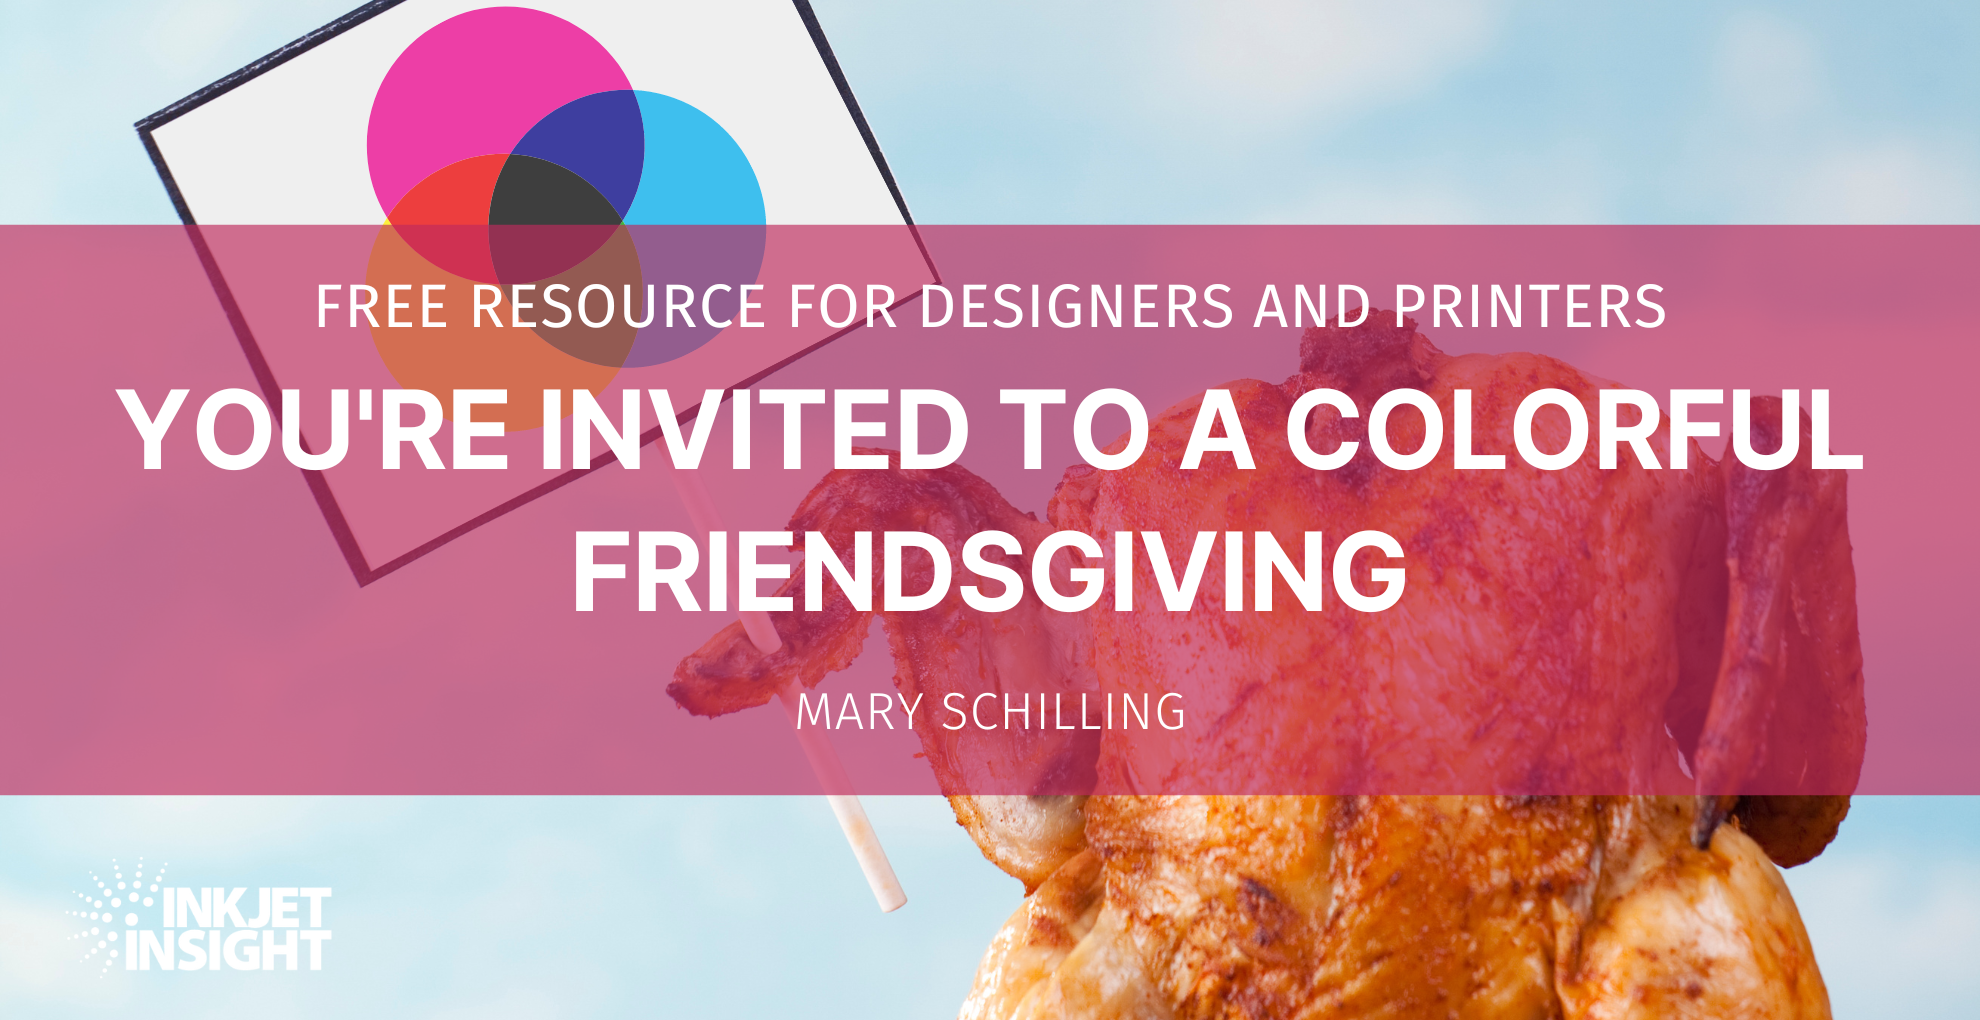 Featured image for “You’re Invited to a Colorful Friendsgiving”